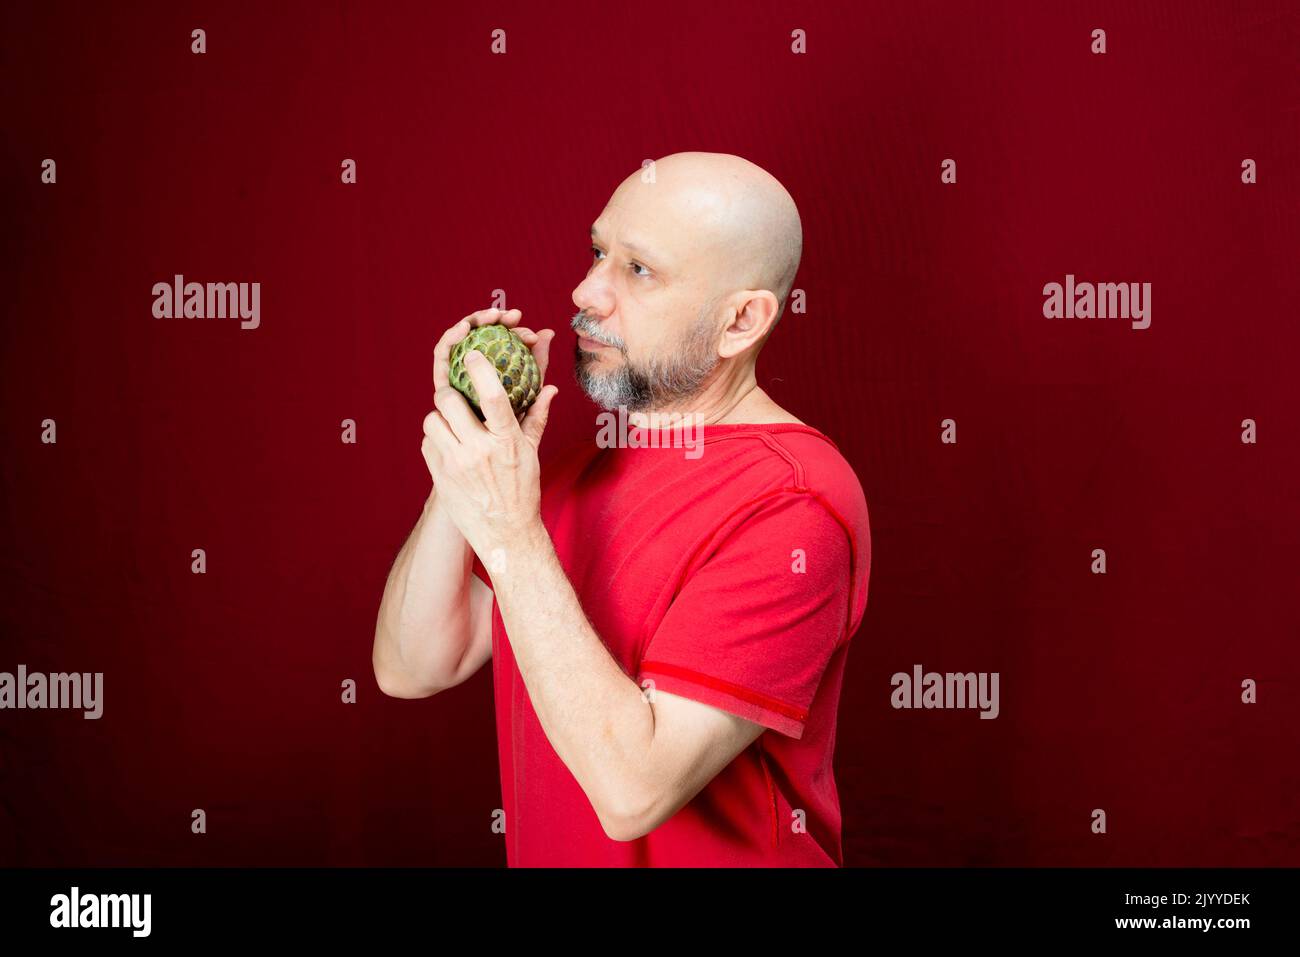 Young handsome man with beard, bald head and red shirt standing holding pinecone fruit against red background. Positive and healthy person. Stock Photo